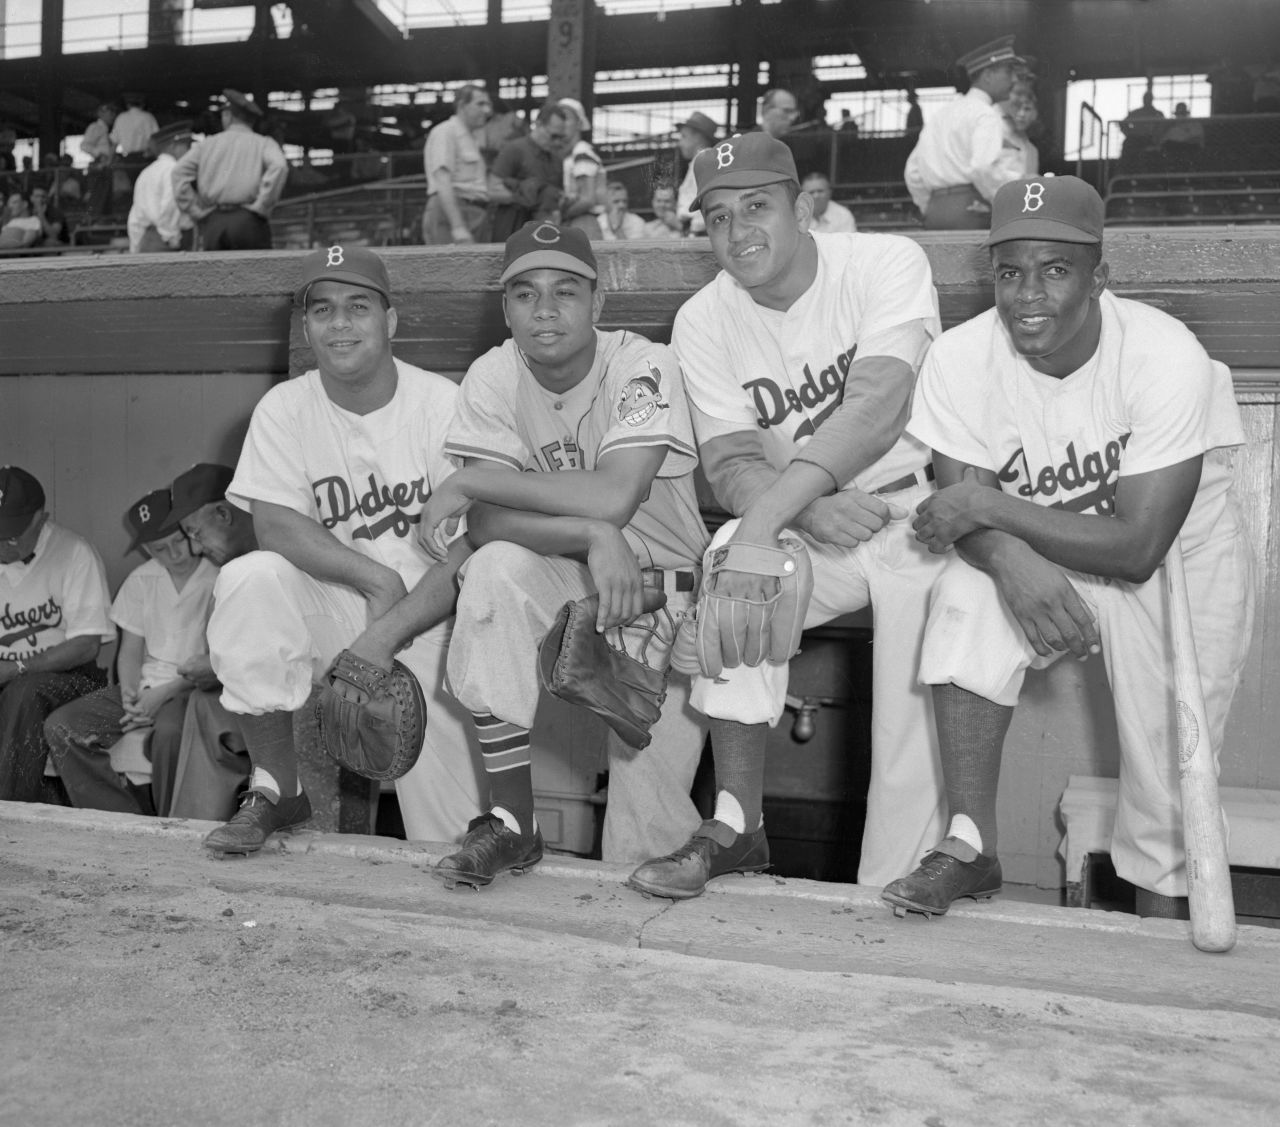 In 1949, black players took part in the All-Star Game for the first time. The first four players, from left, were Roy Campanella, Larry Doby, Don Newcombe and Jackie Robinson.